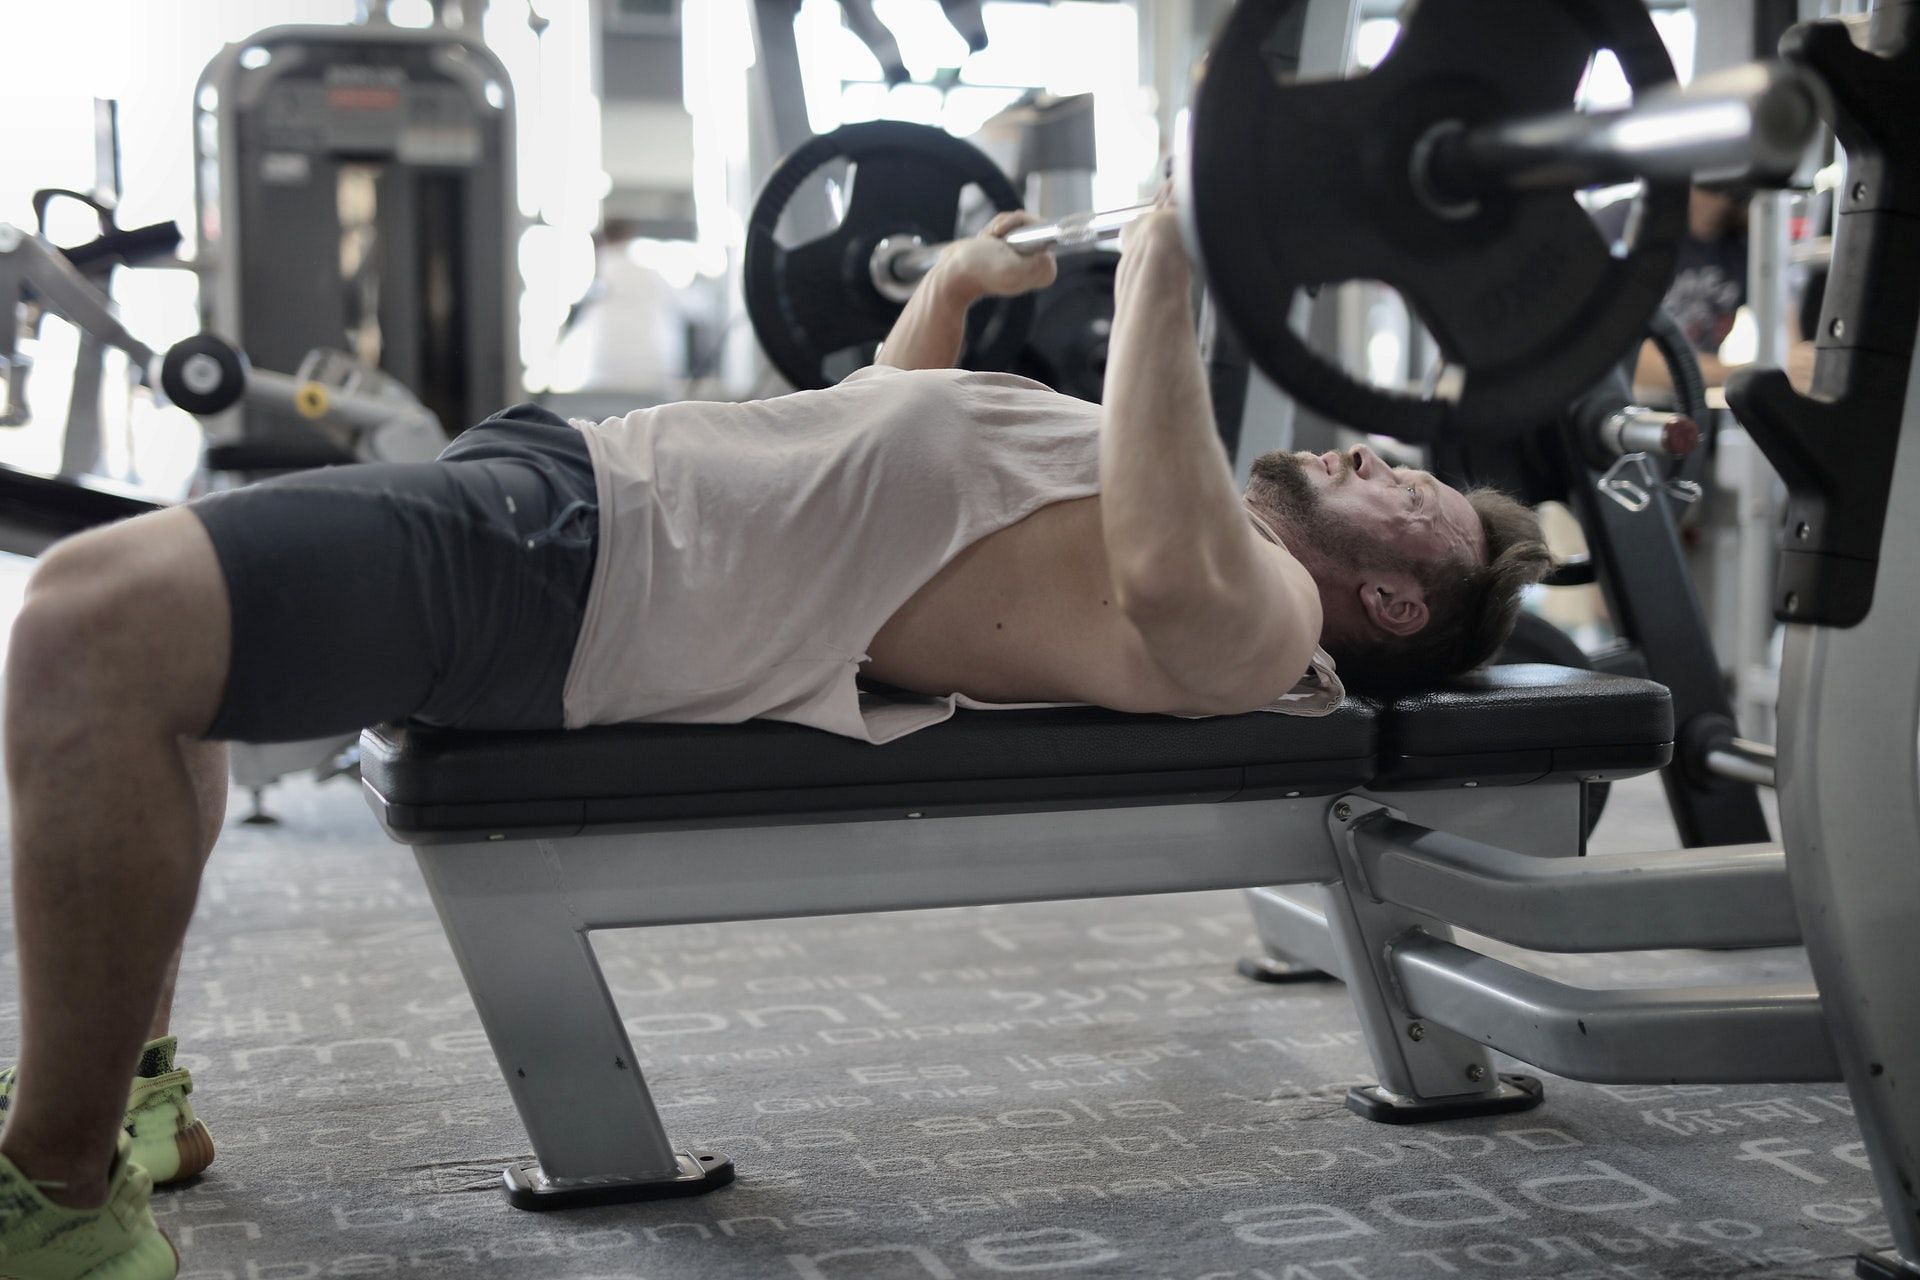 You can get defined pecs with these exercises. (Photo by Andrea Piacquadio via pexels)